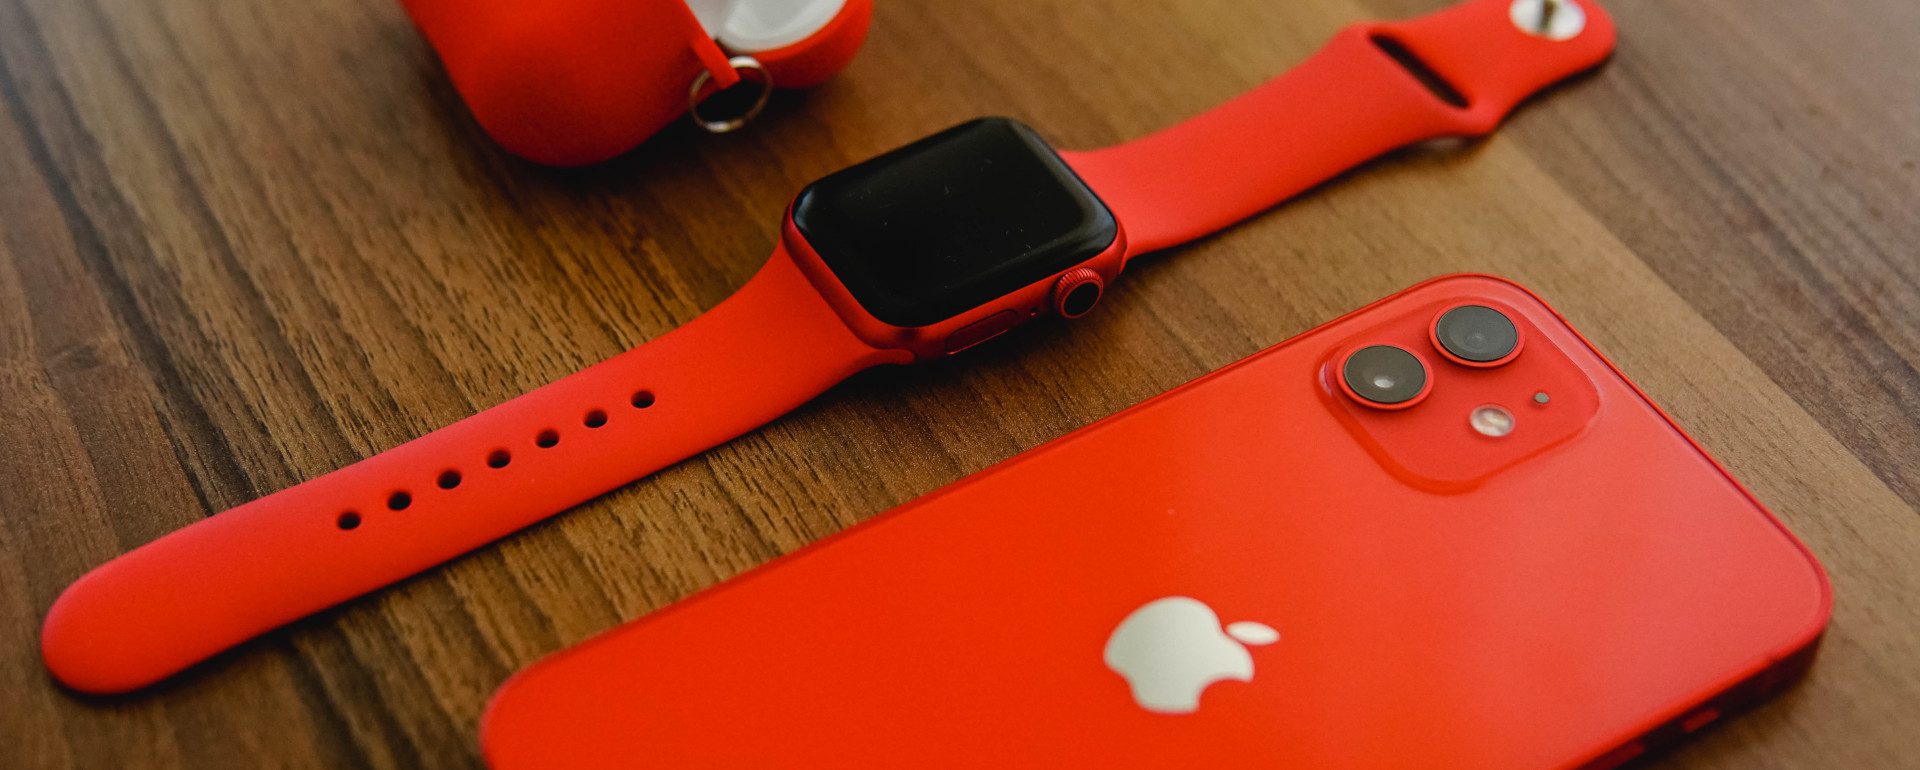 red apple watch, iphone and earpods case on smooth wooden table